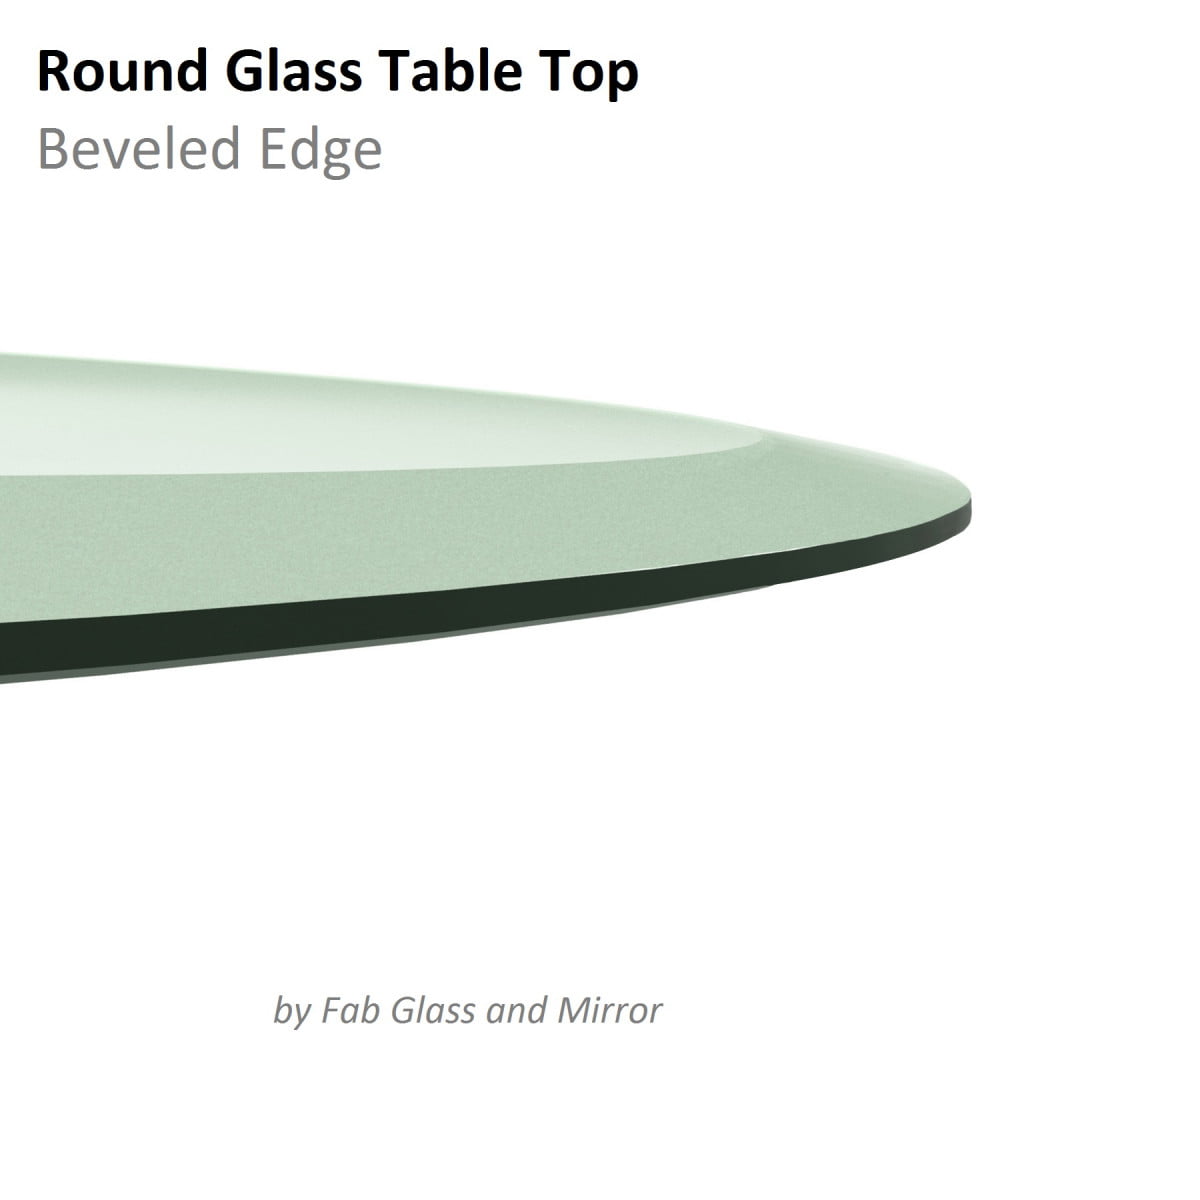 30 Inch Round Glass Table Top 3 4 Inch Thick Clear Tempered Glass With Beveled Edge Polished Walmartcom Walmartcom